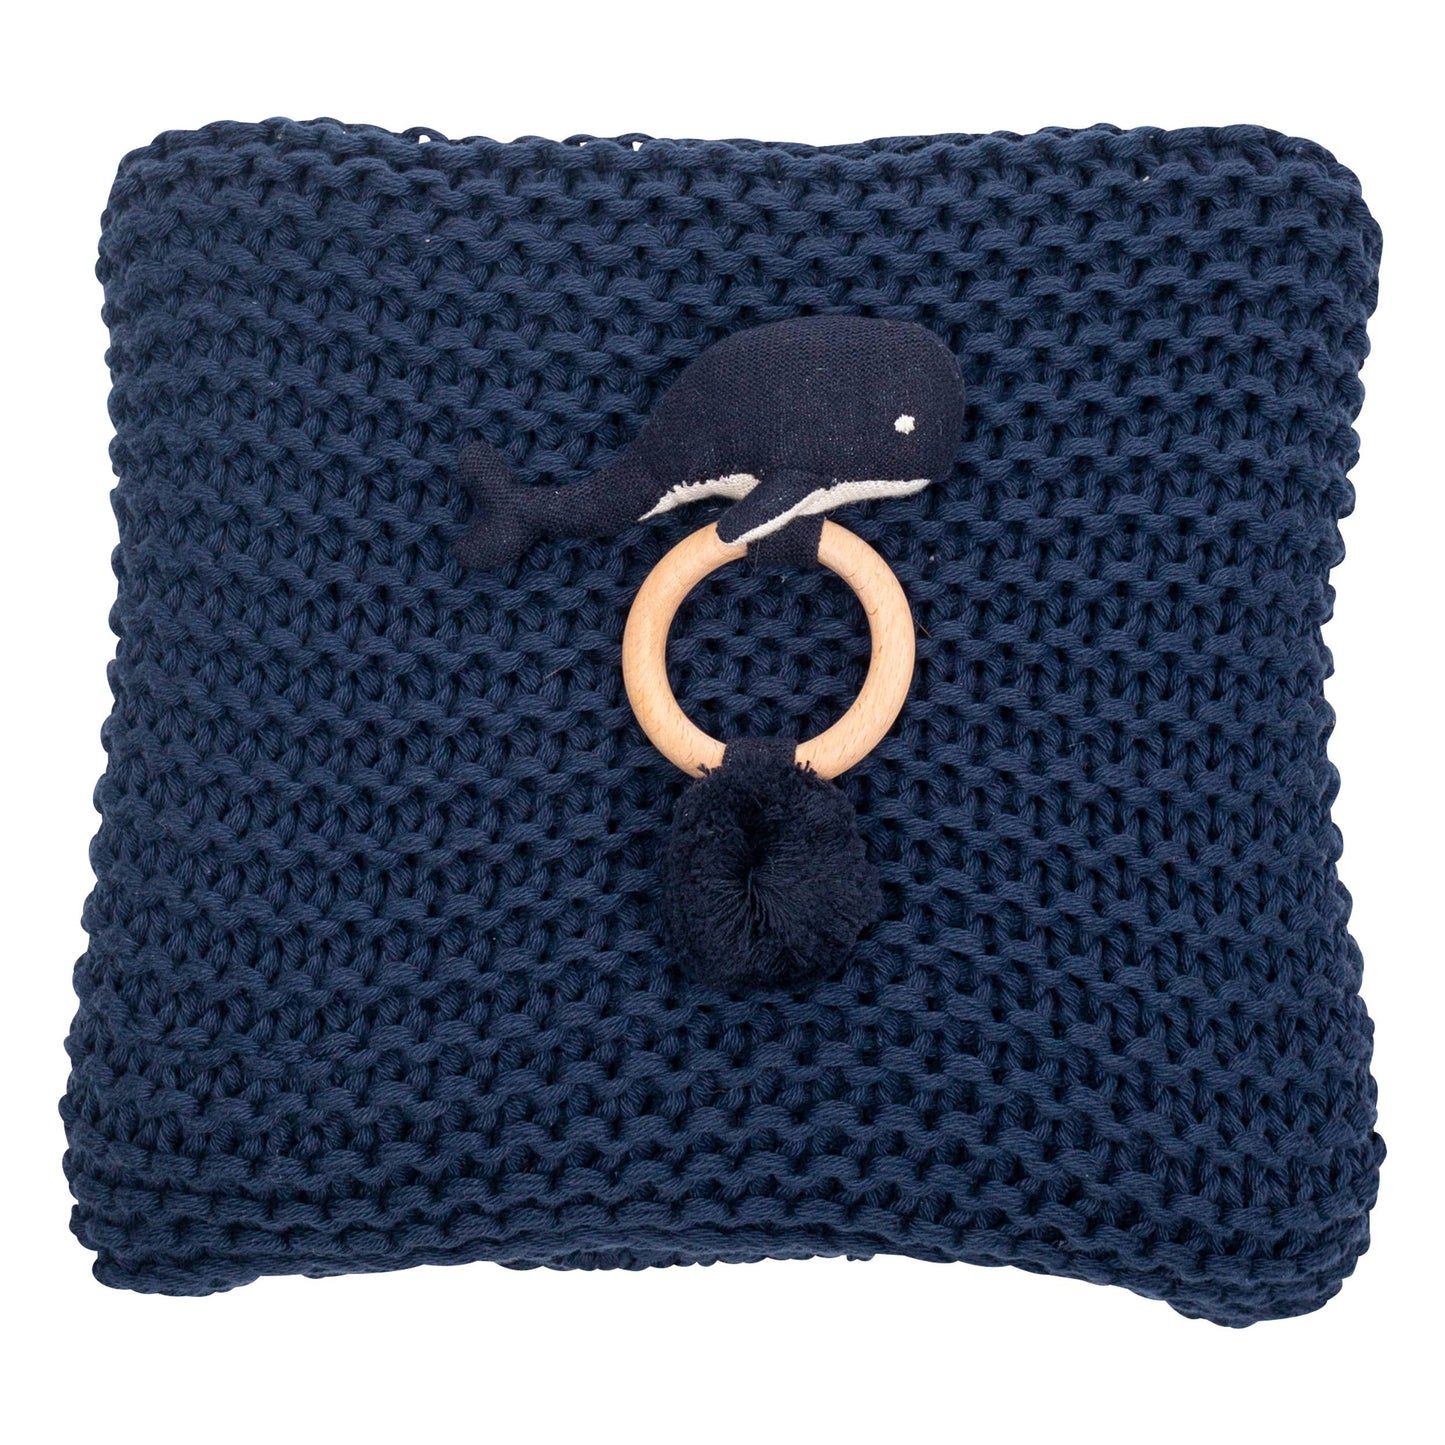 Organic Cotton Comfy Knit Baby Gift Set Navy